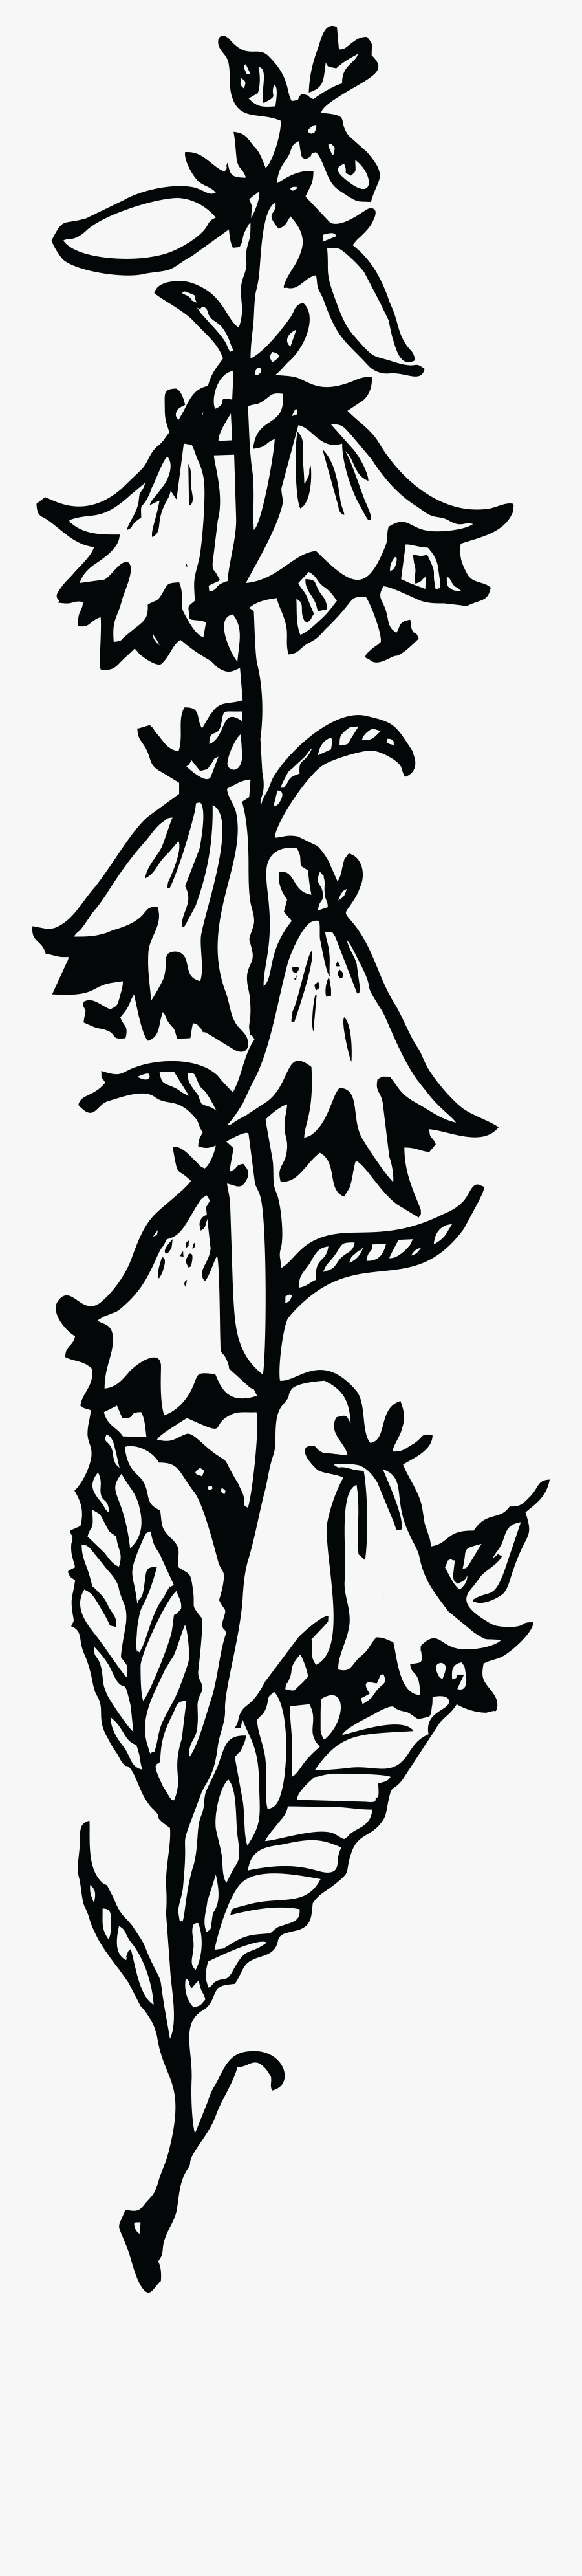 Free Clipart Of A Floral Stalk, Transparent Clipart